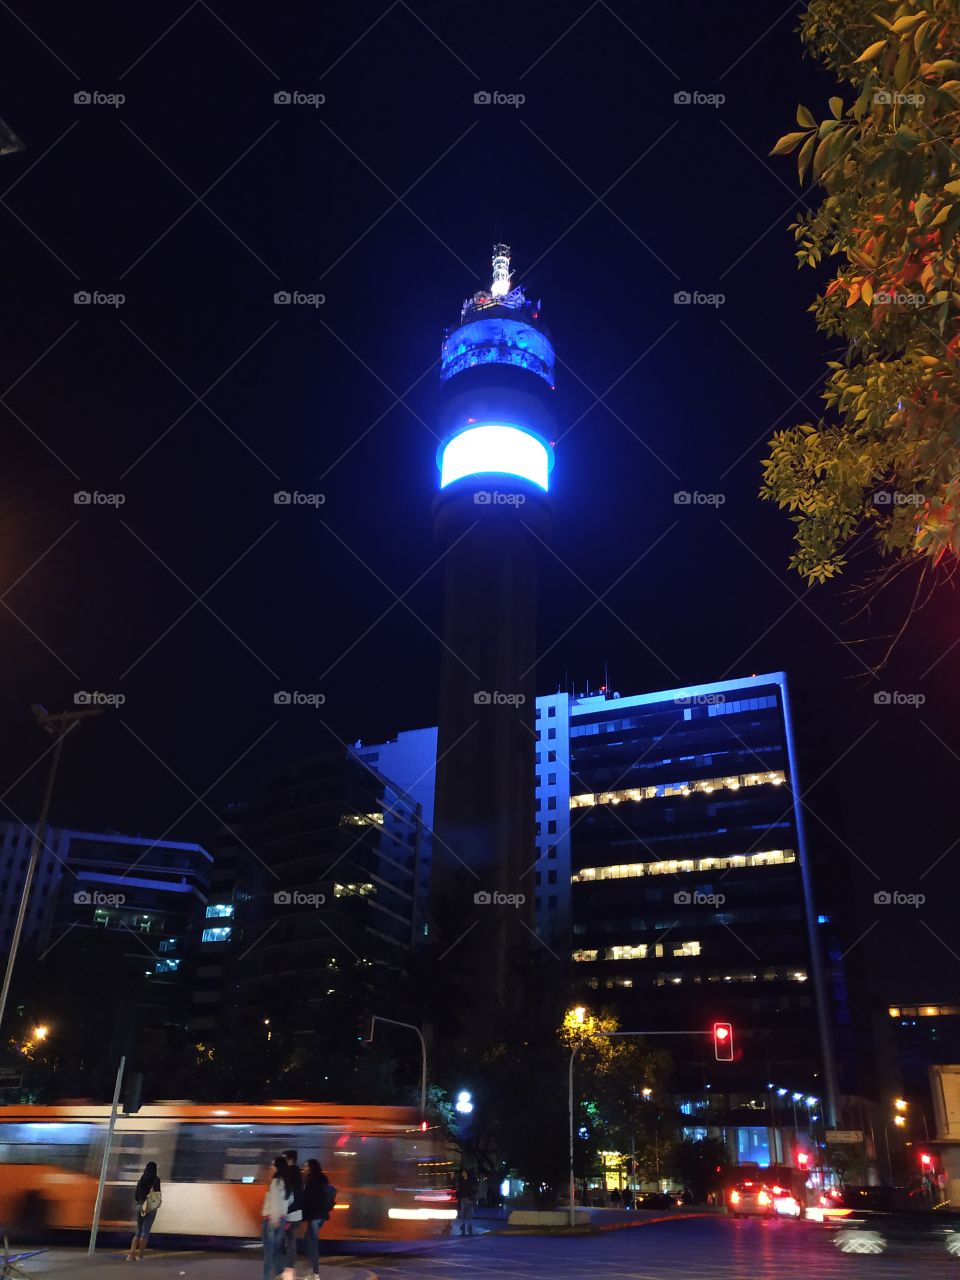 Torre Entel in the night, Santiago,Chile.